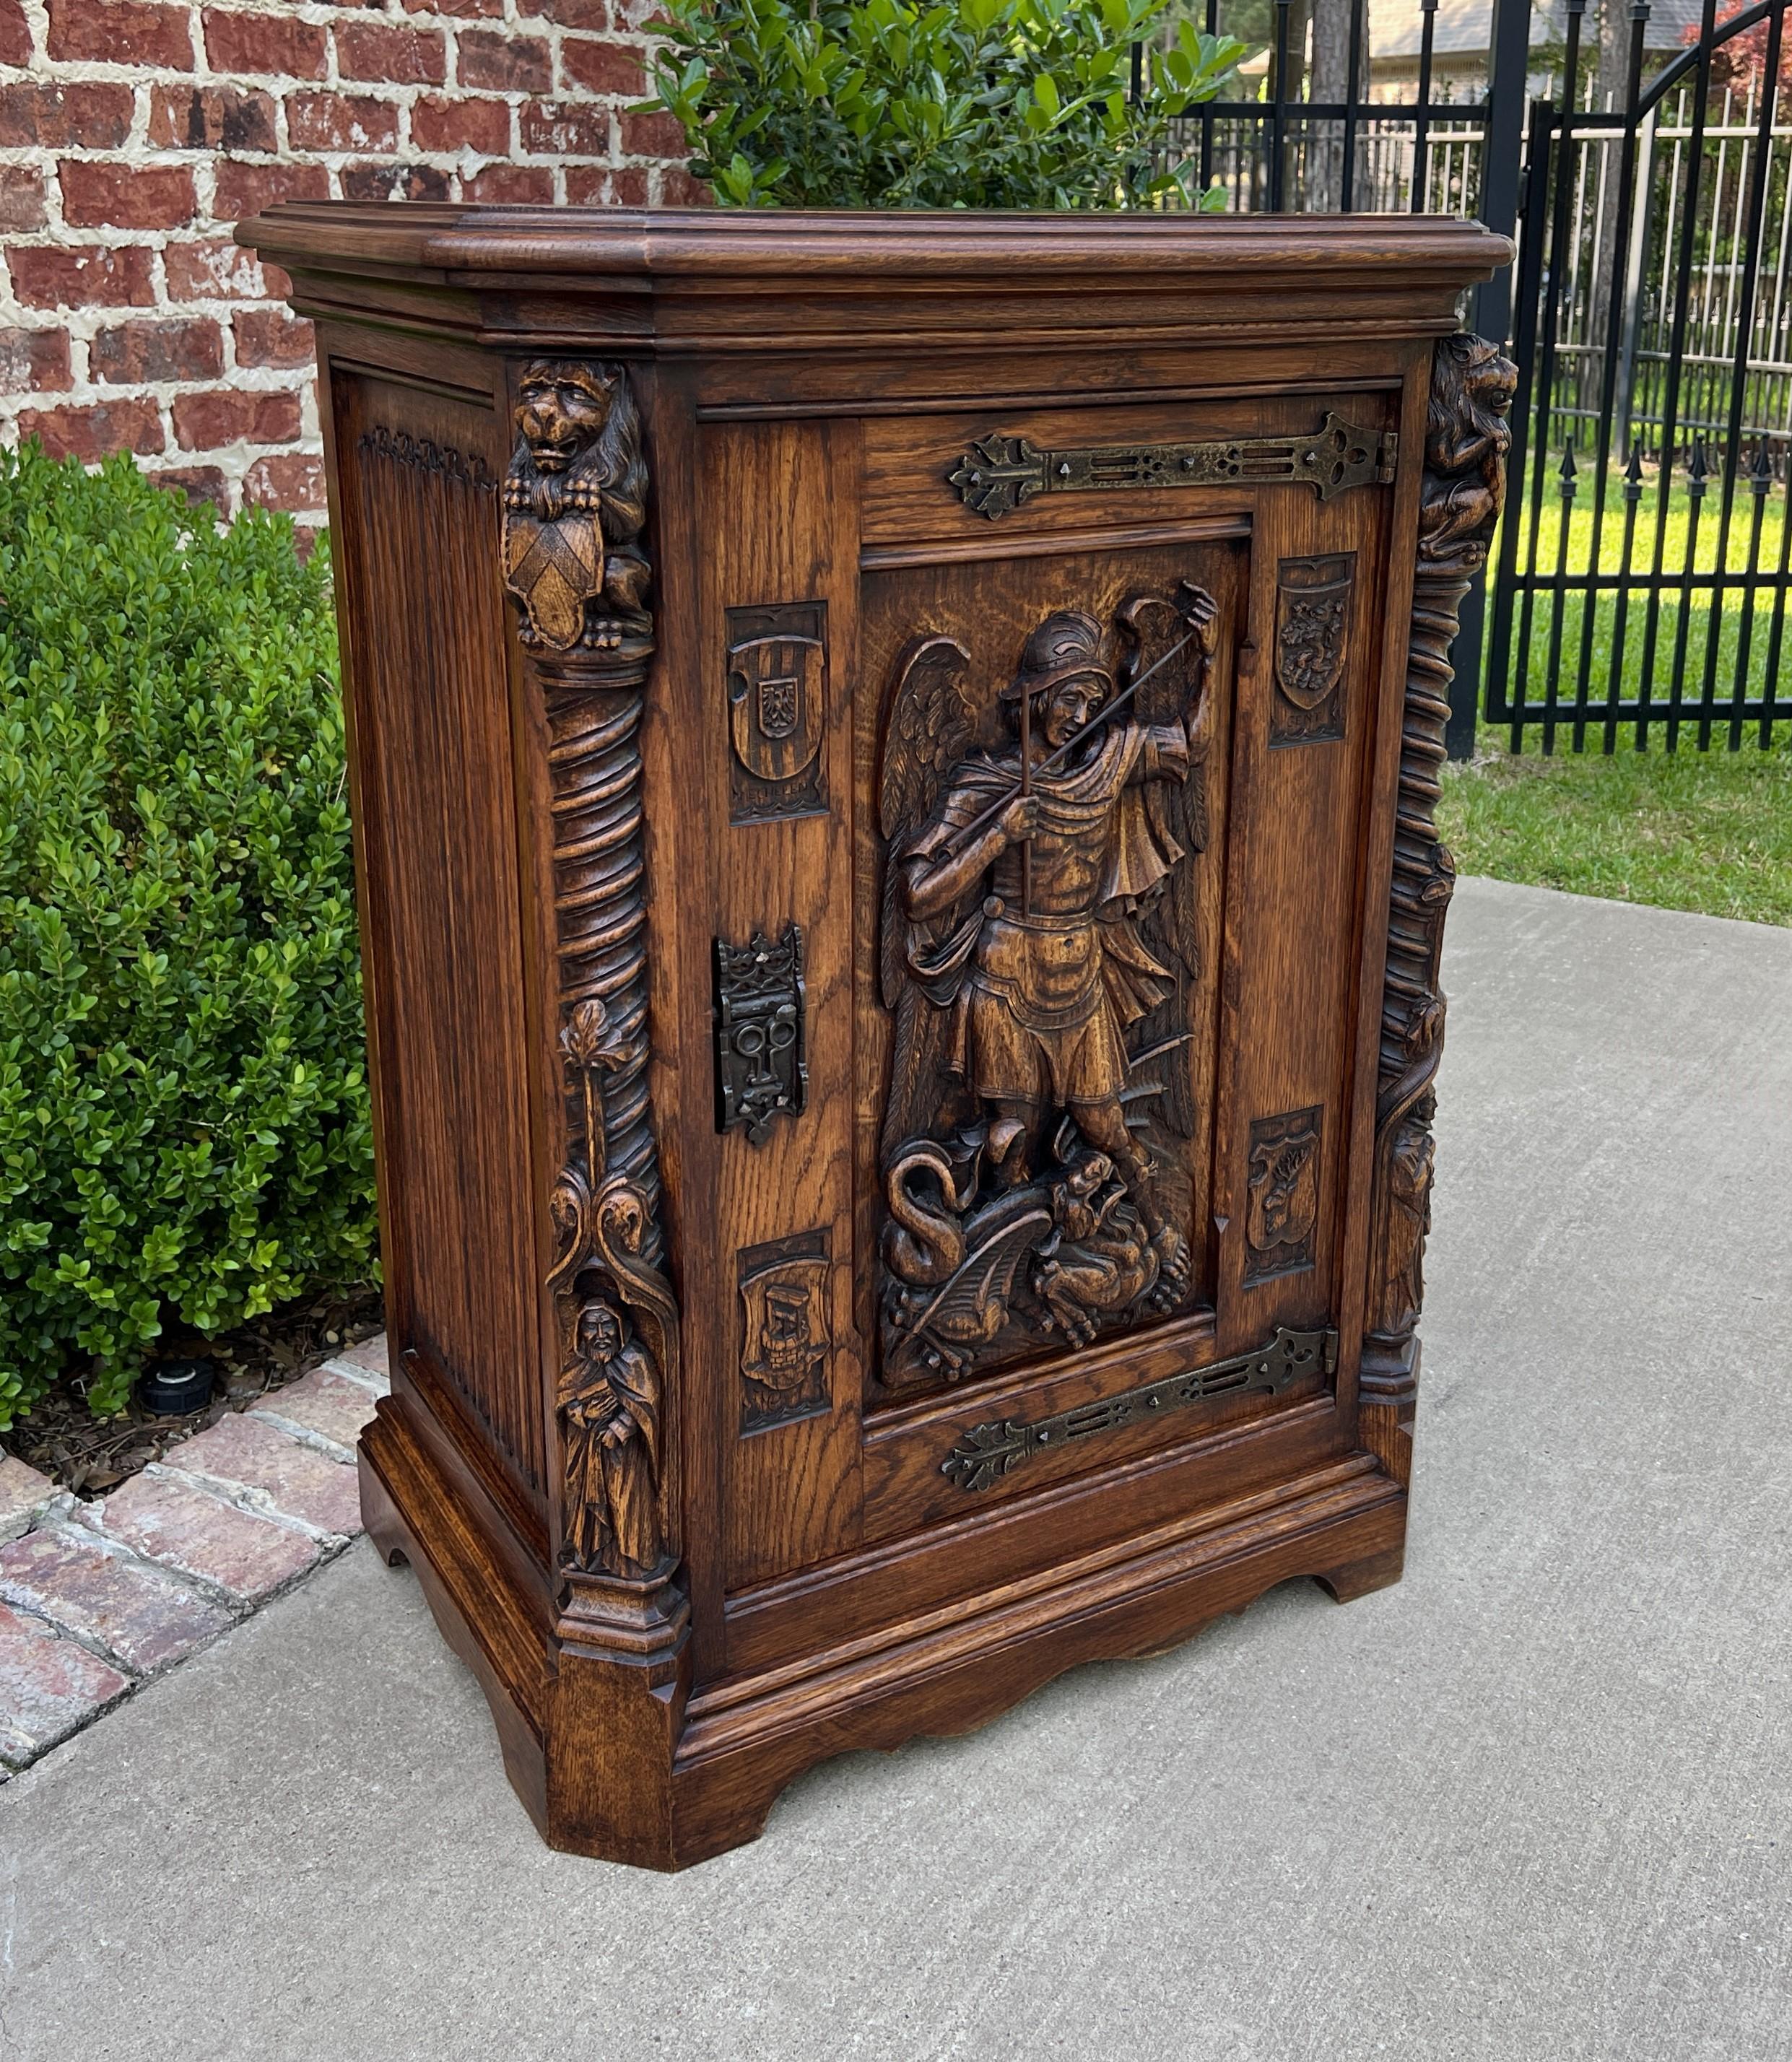 EXCEPTIONAL Antique French HIGHLY CARVED Oak Renaissance Revival Cabinet~~Barley Twist~~Archangel St. Michael~~Lions~~Monks~~c. 1880s 

Perfect statement piece that can accommodate any number of storage needs in today's home~~use in a bedroom or